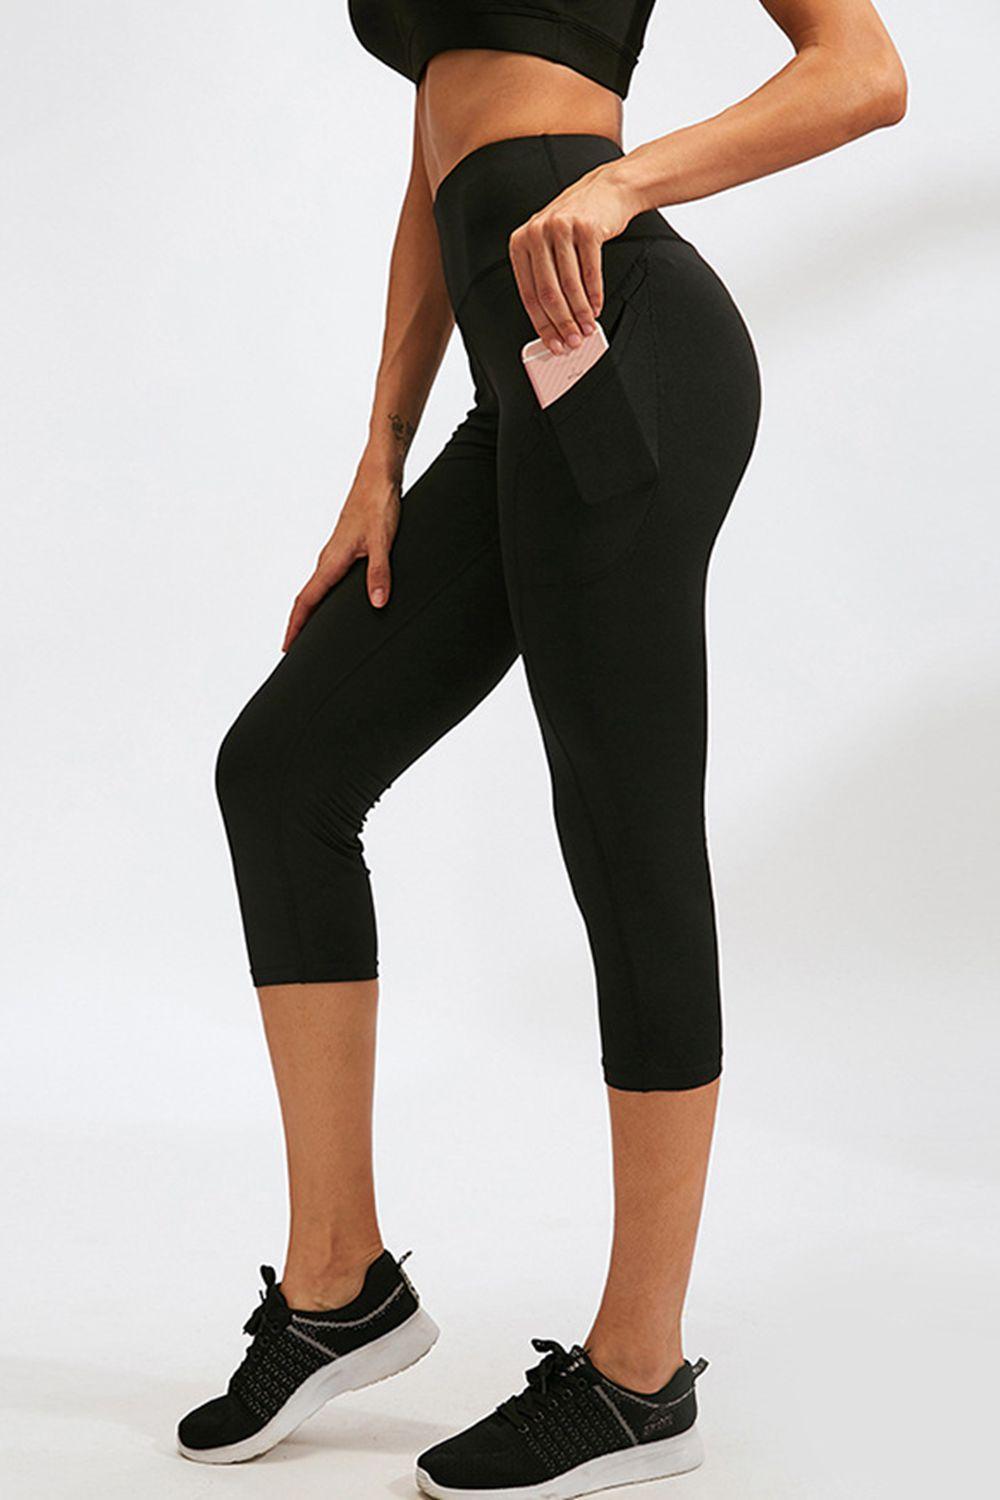 Slim Fit Wide Waistband Active Leggings with Pockets - Lab Fashion, Home & Health